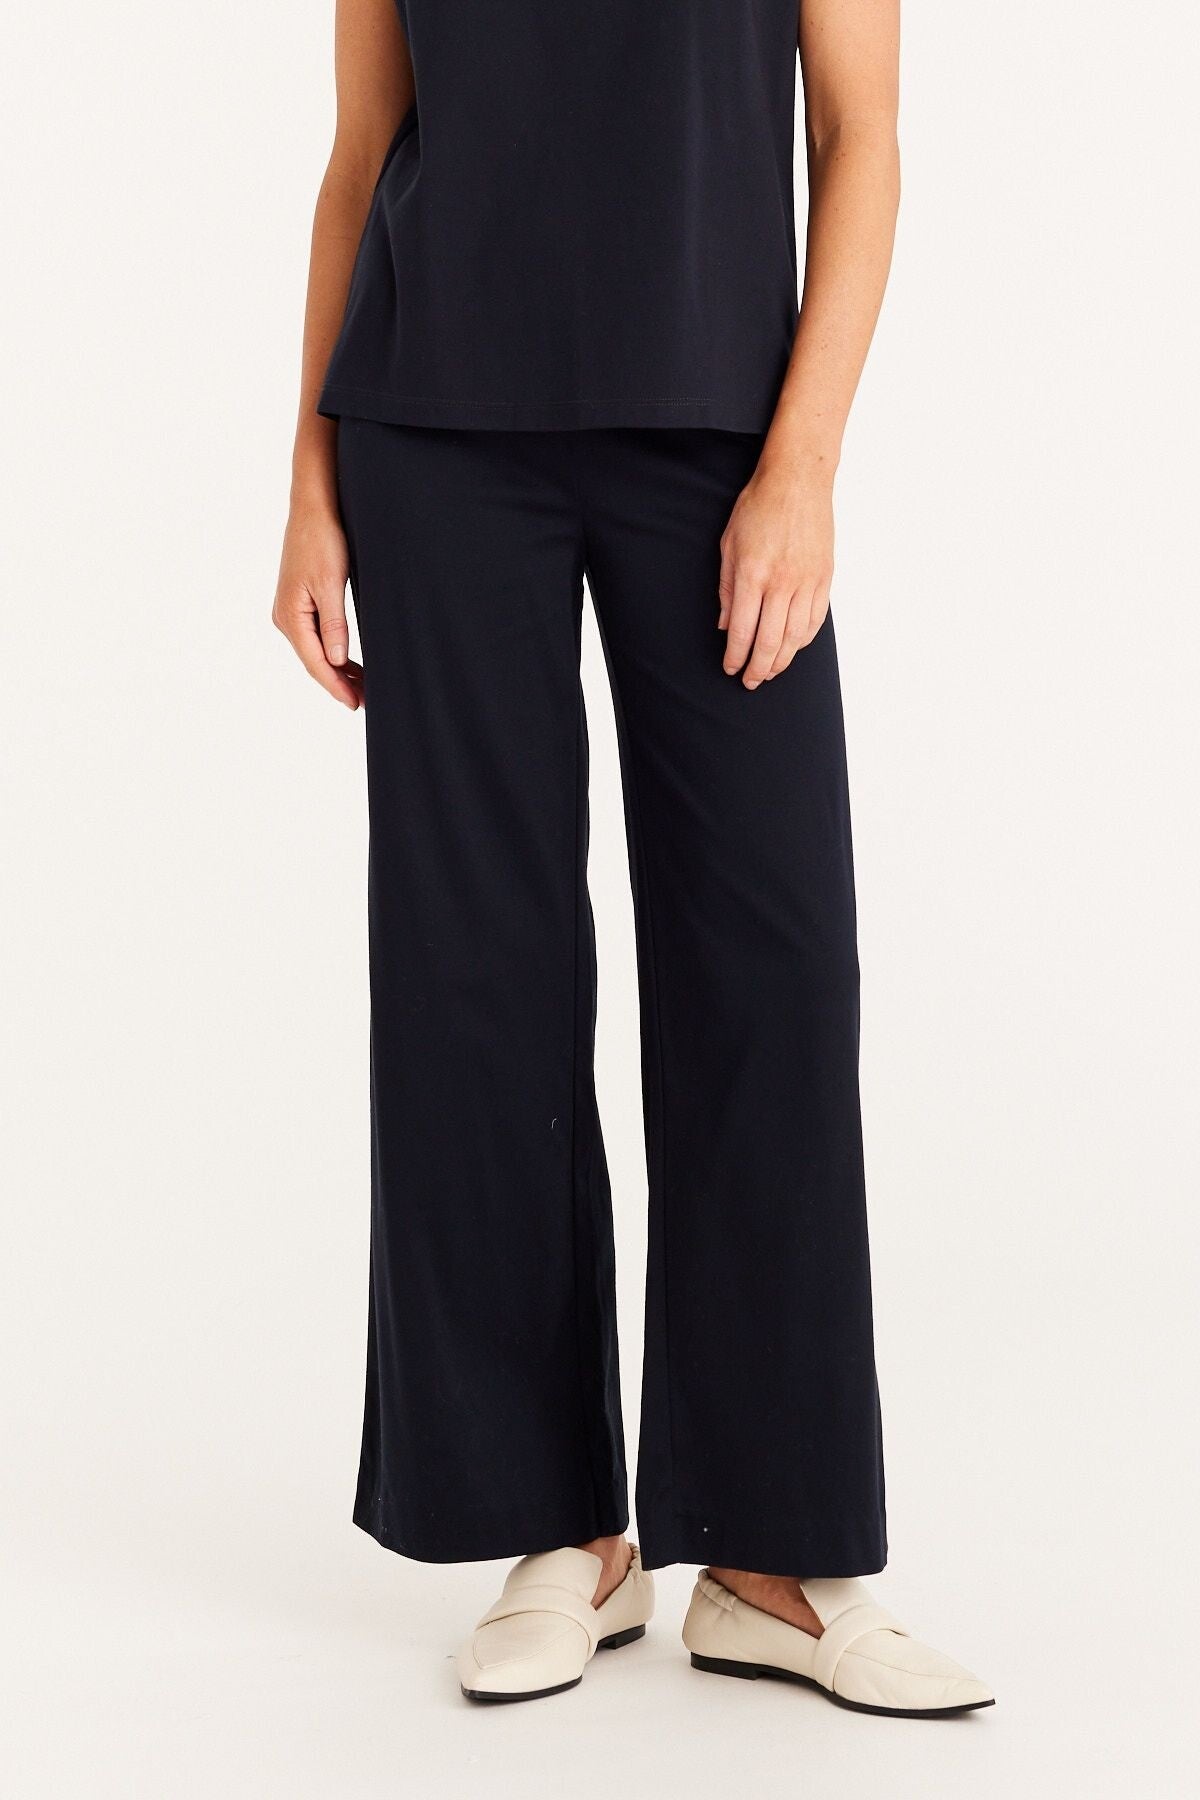 Cable - Spring Ponti Pant